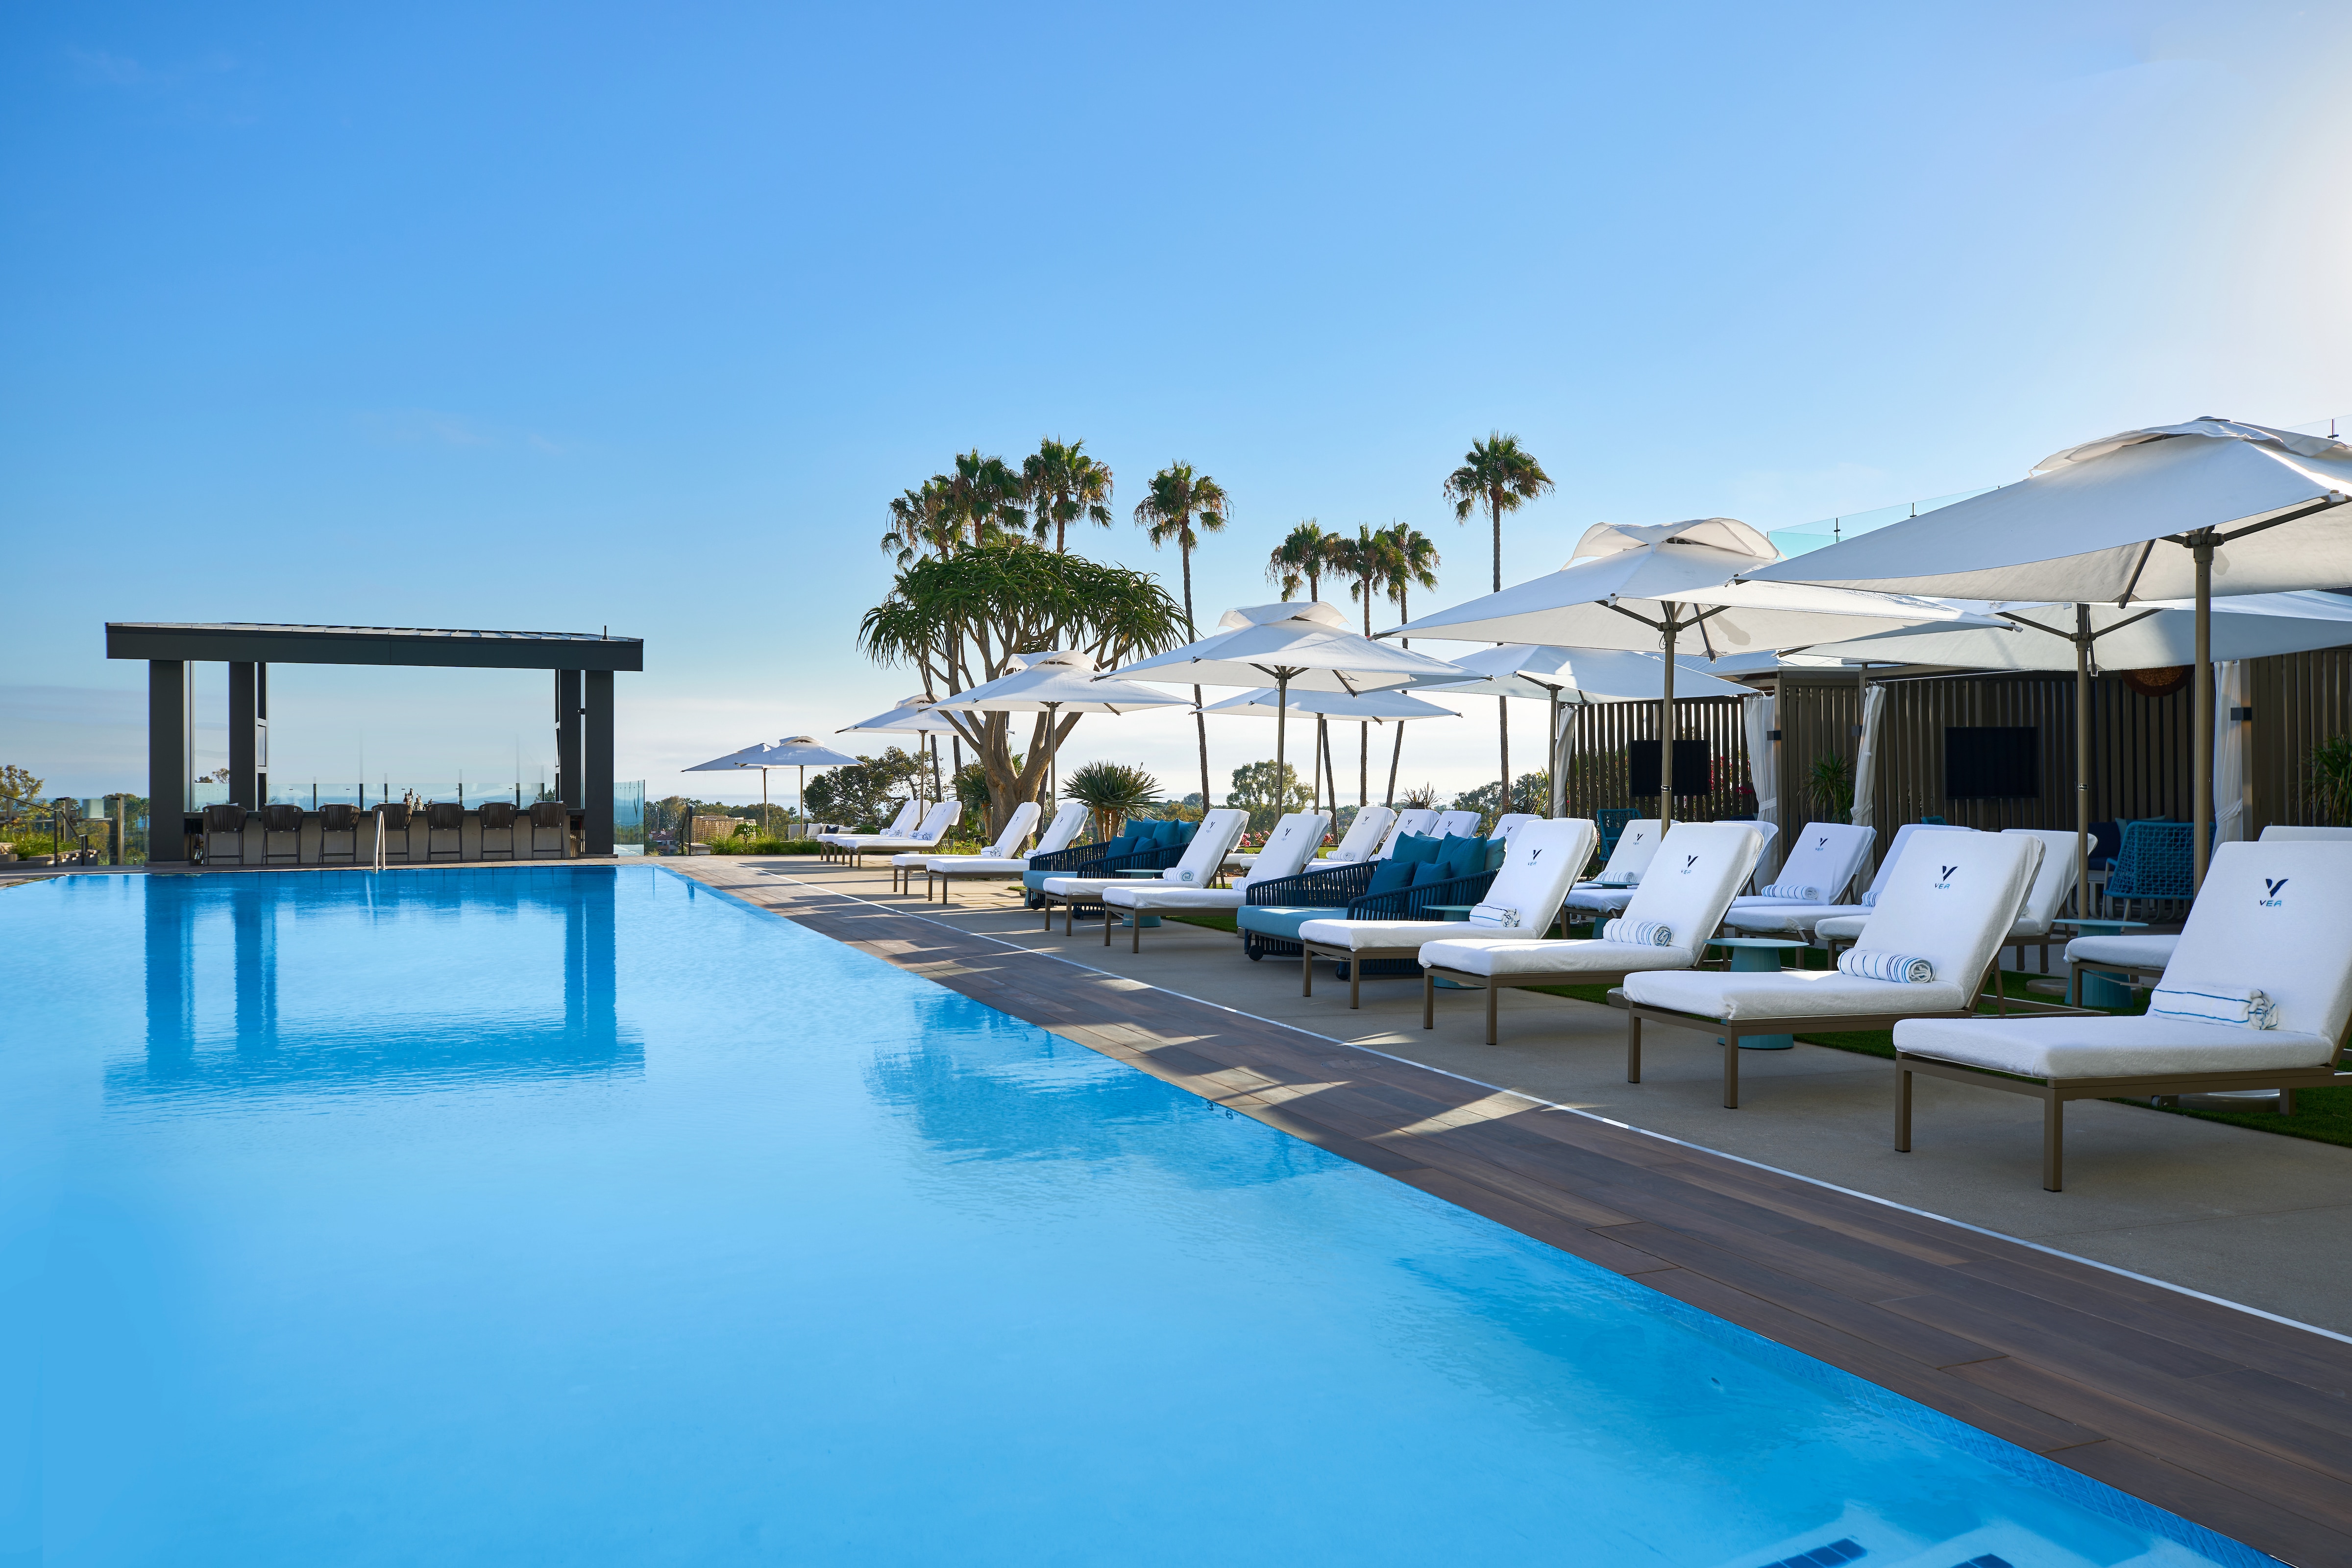 The Island Hotel Newport Beach - Guest Reservations